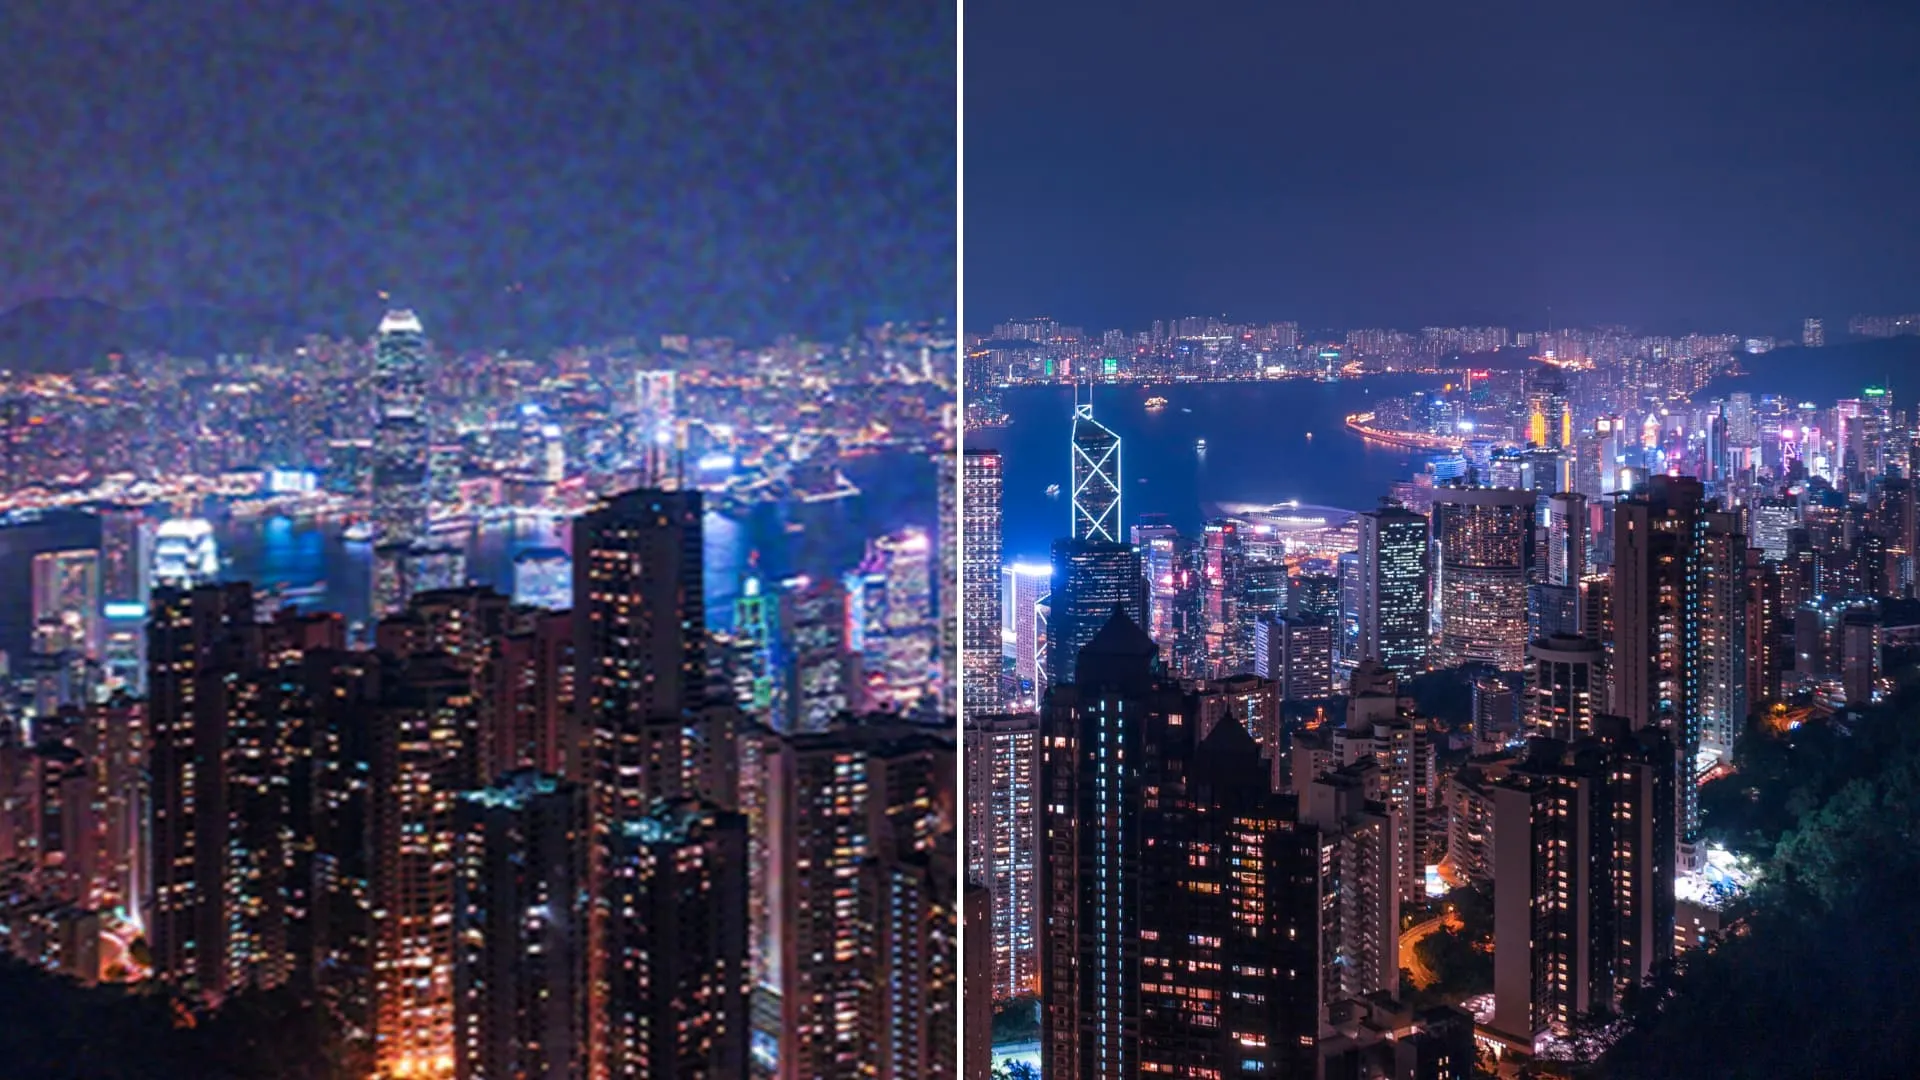 Transform low-resolution images into stunning visuals